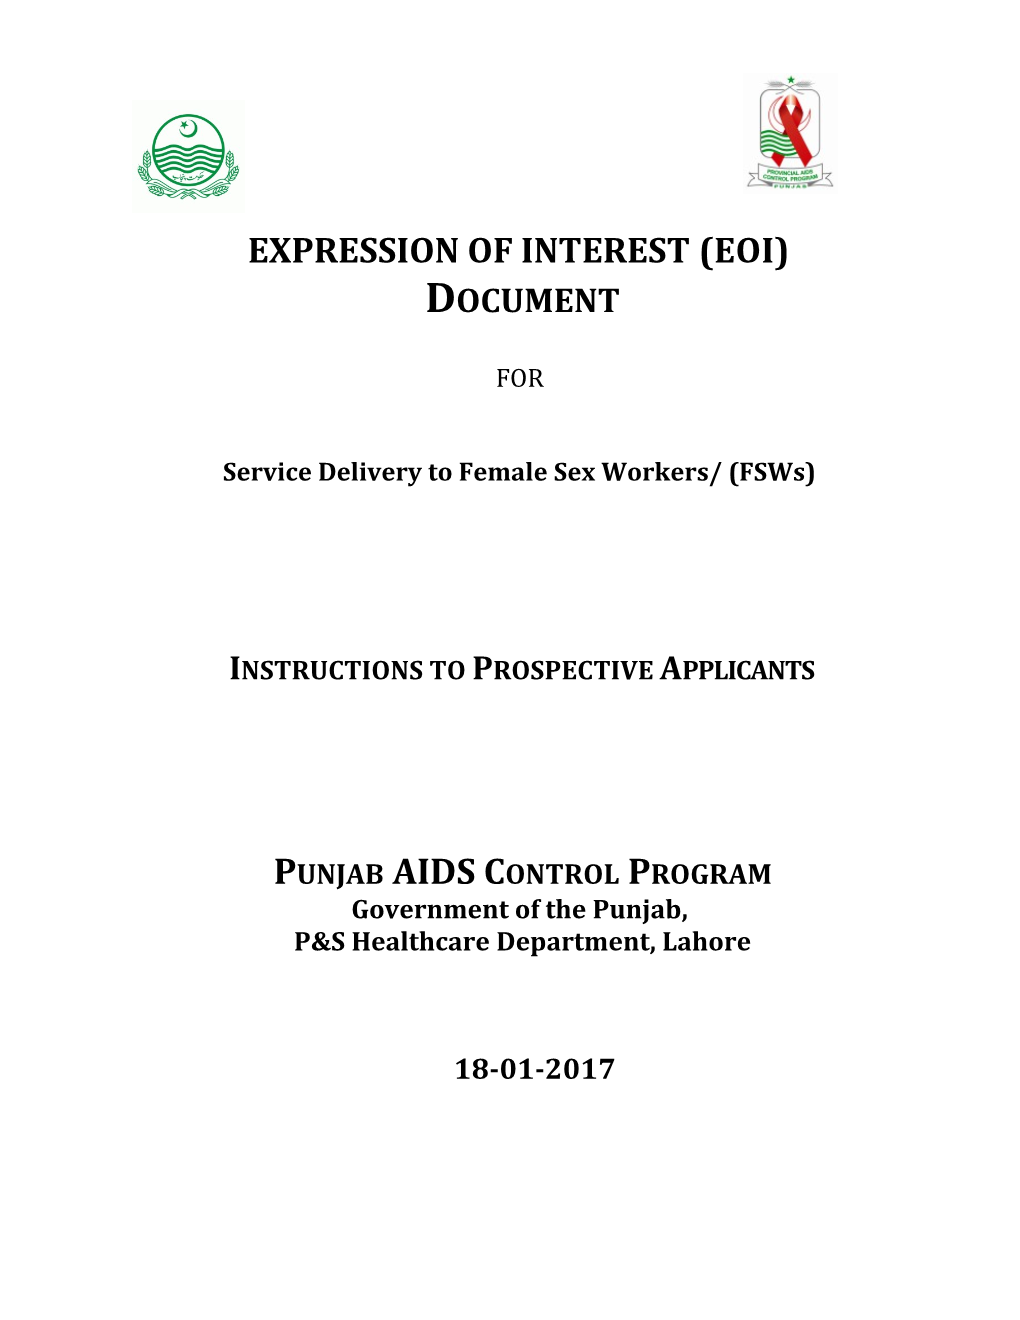 Service Delivery to Female Sex Workers/ (Fsws)